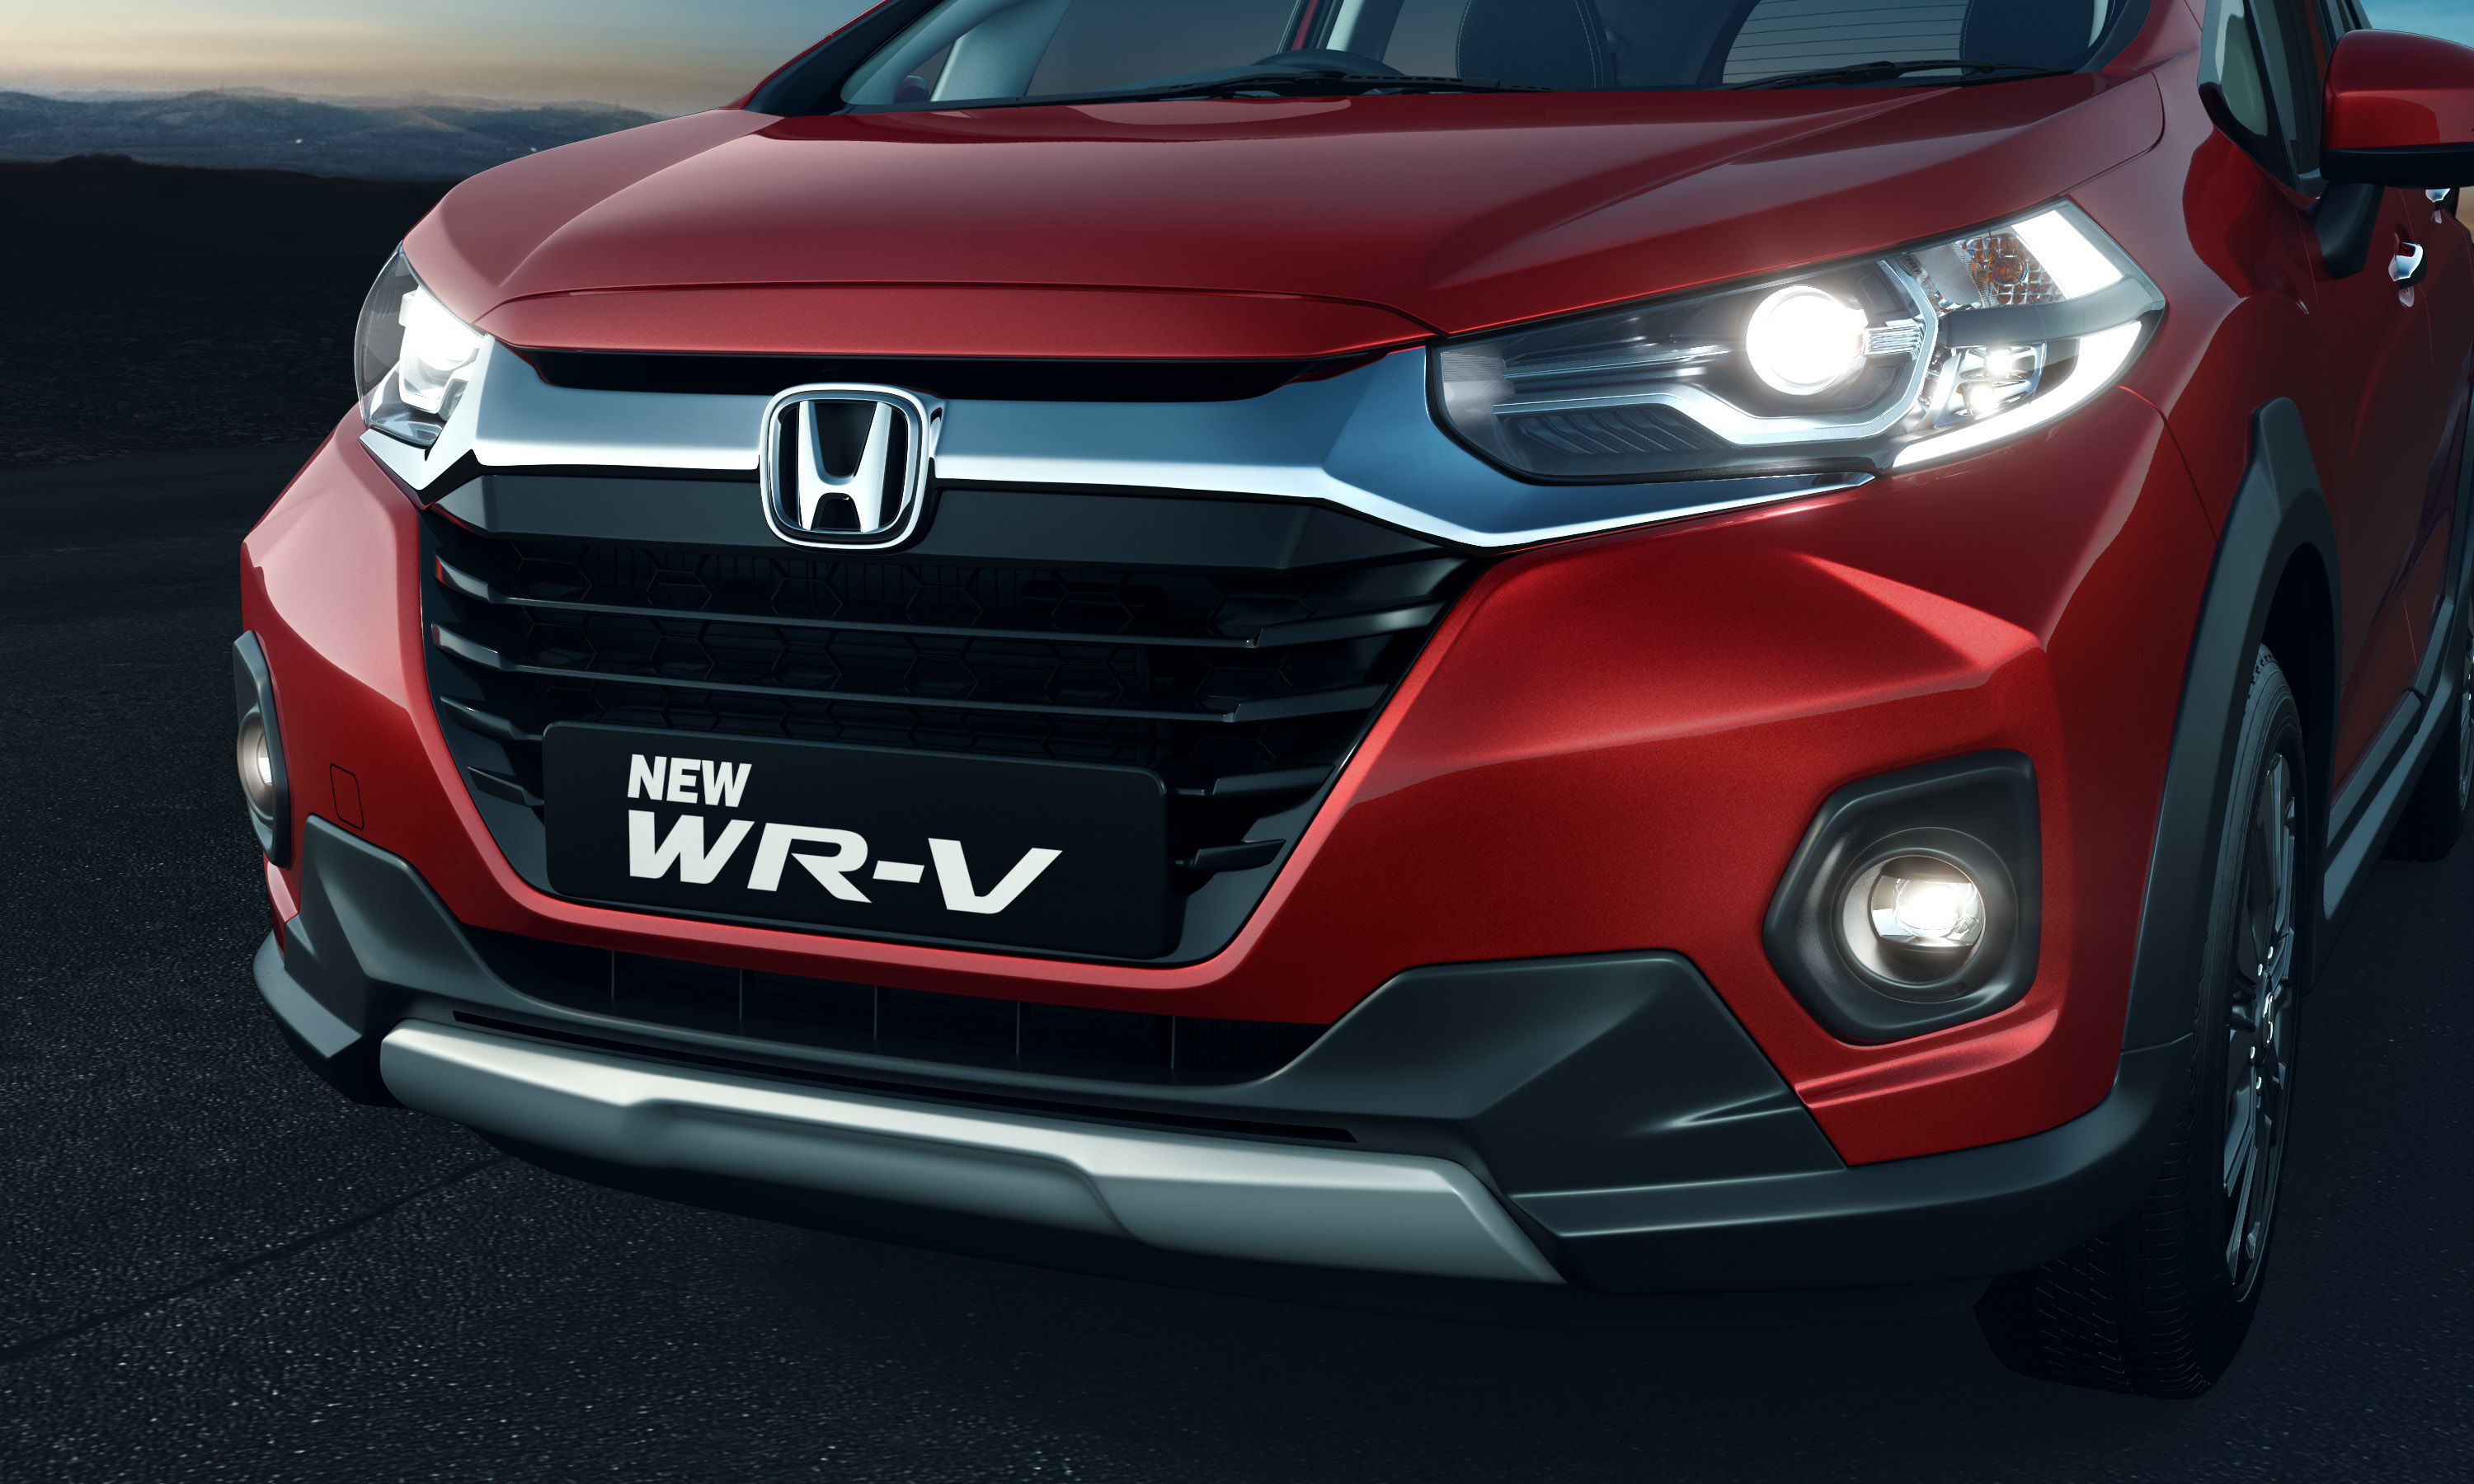 In Pics Honda Wr V Launched With Style Upgrades And Bs 6 Engine Options